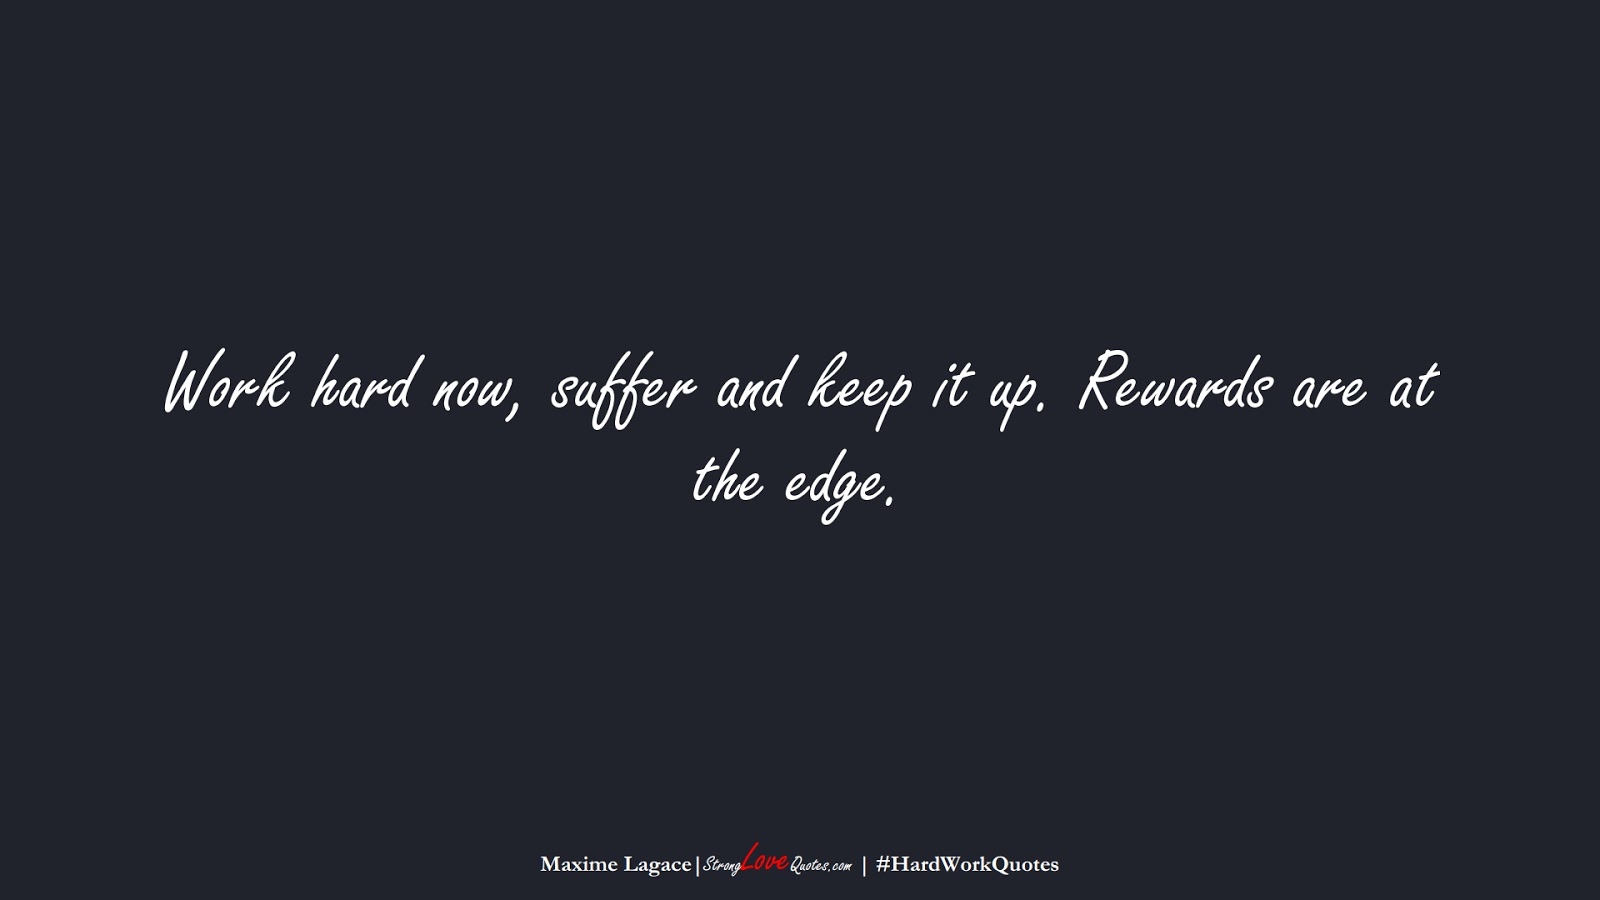 Work hard now, suffer and keep it up. Rewards are at the edge. (Maxime Lagace);  #HardWorkQuotes